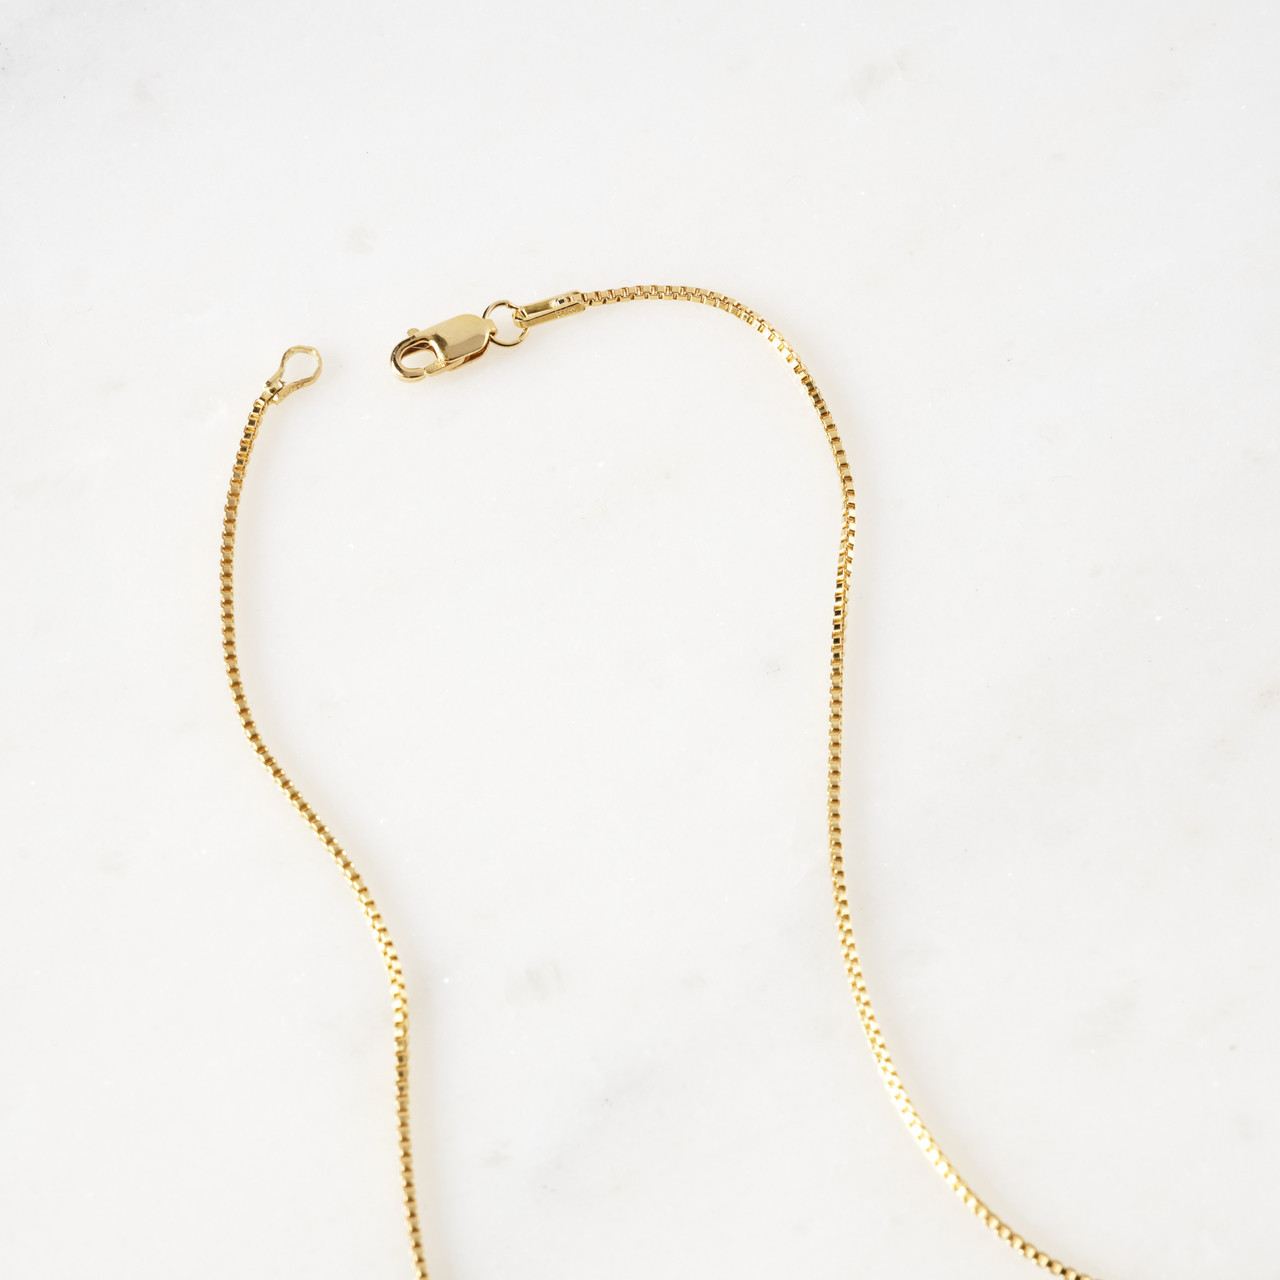 Give and Receive Brass Necklace by Moon + Arrow - Philadelphia